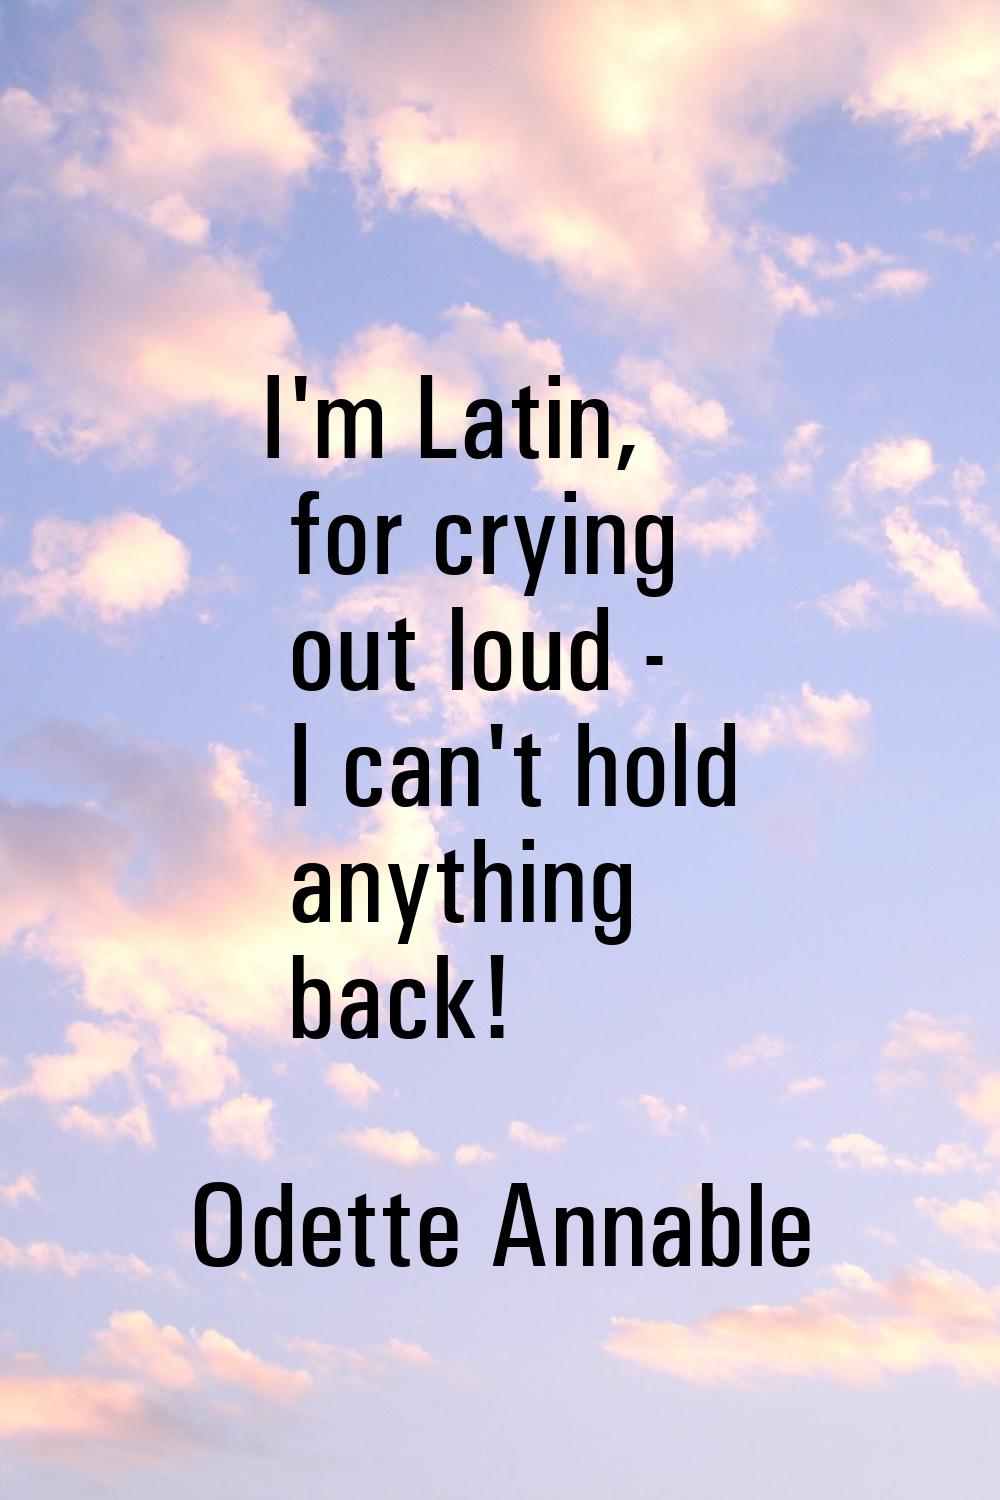 I'm Latin, for crying out loud - I can't hold anything back!